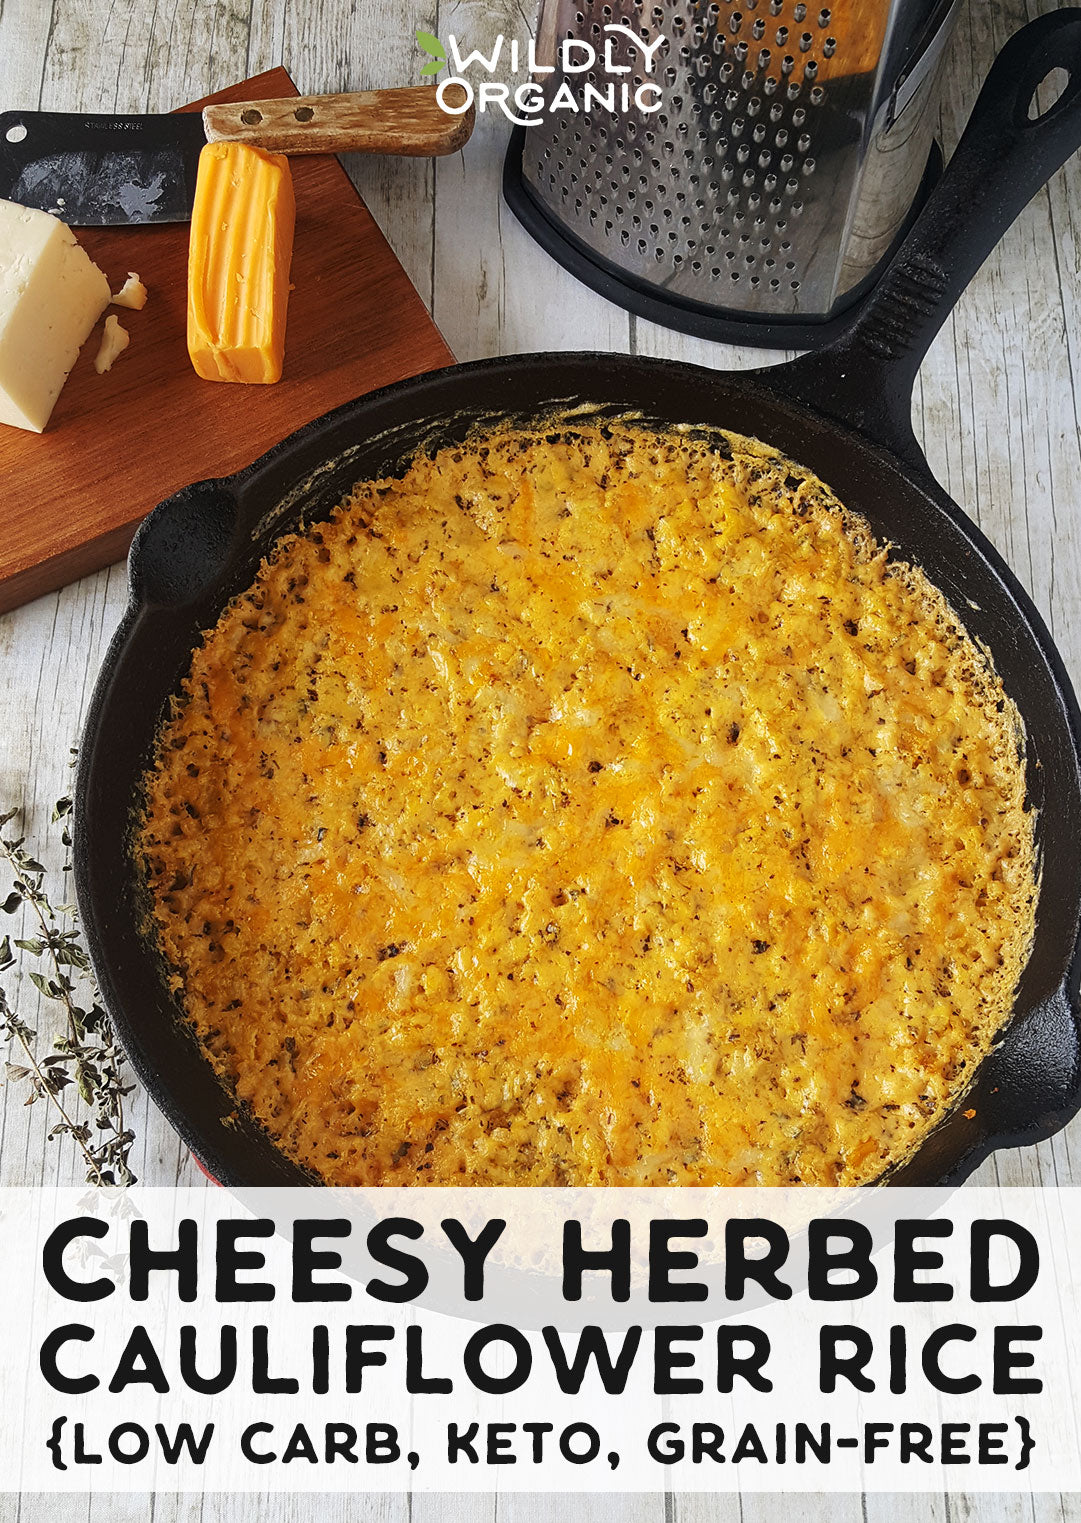 Photo of Cheesy Herbed Cauliflower Rice in a cast-iron skillet with cheese, a cutting board, knife, and grater in the background.